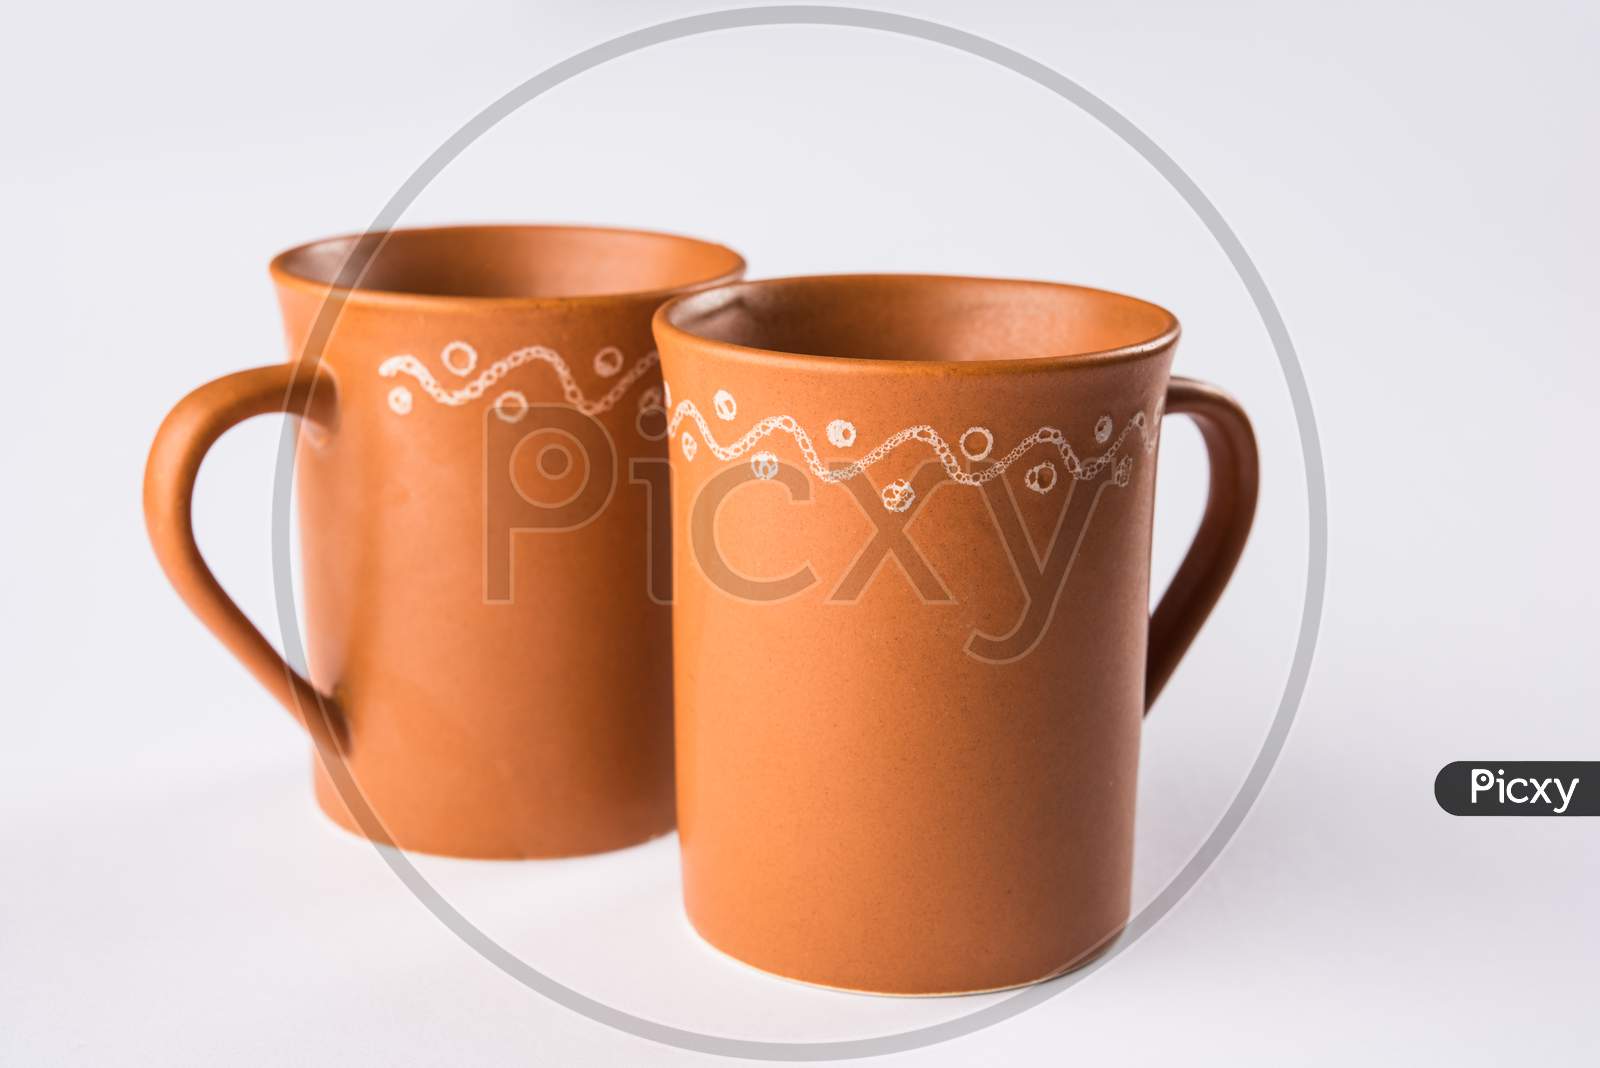 Empty terracotta mug or brown clay coffee cup or jar or drinking glass, isolated over white